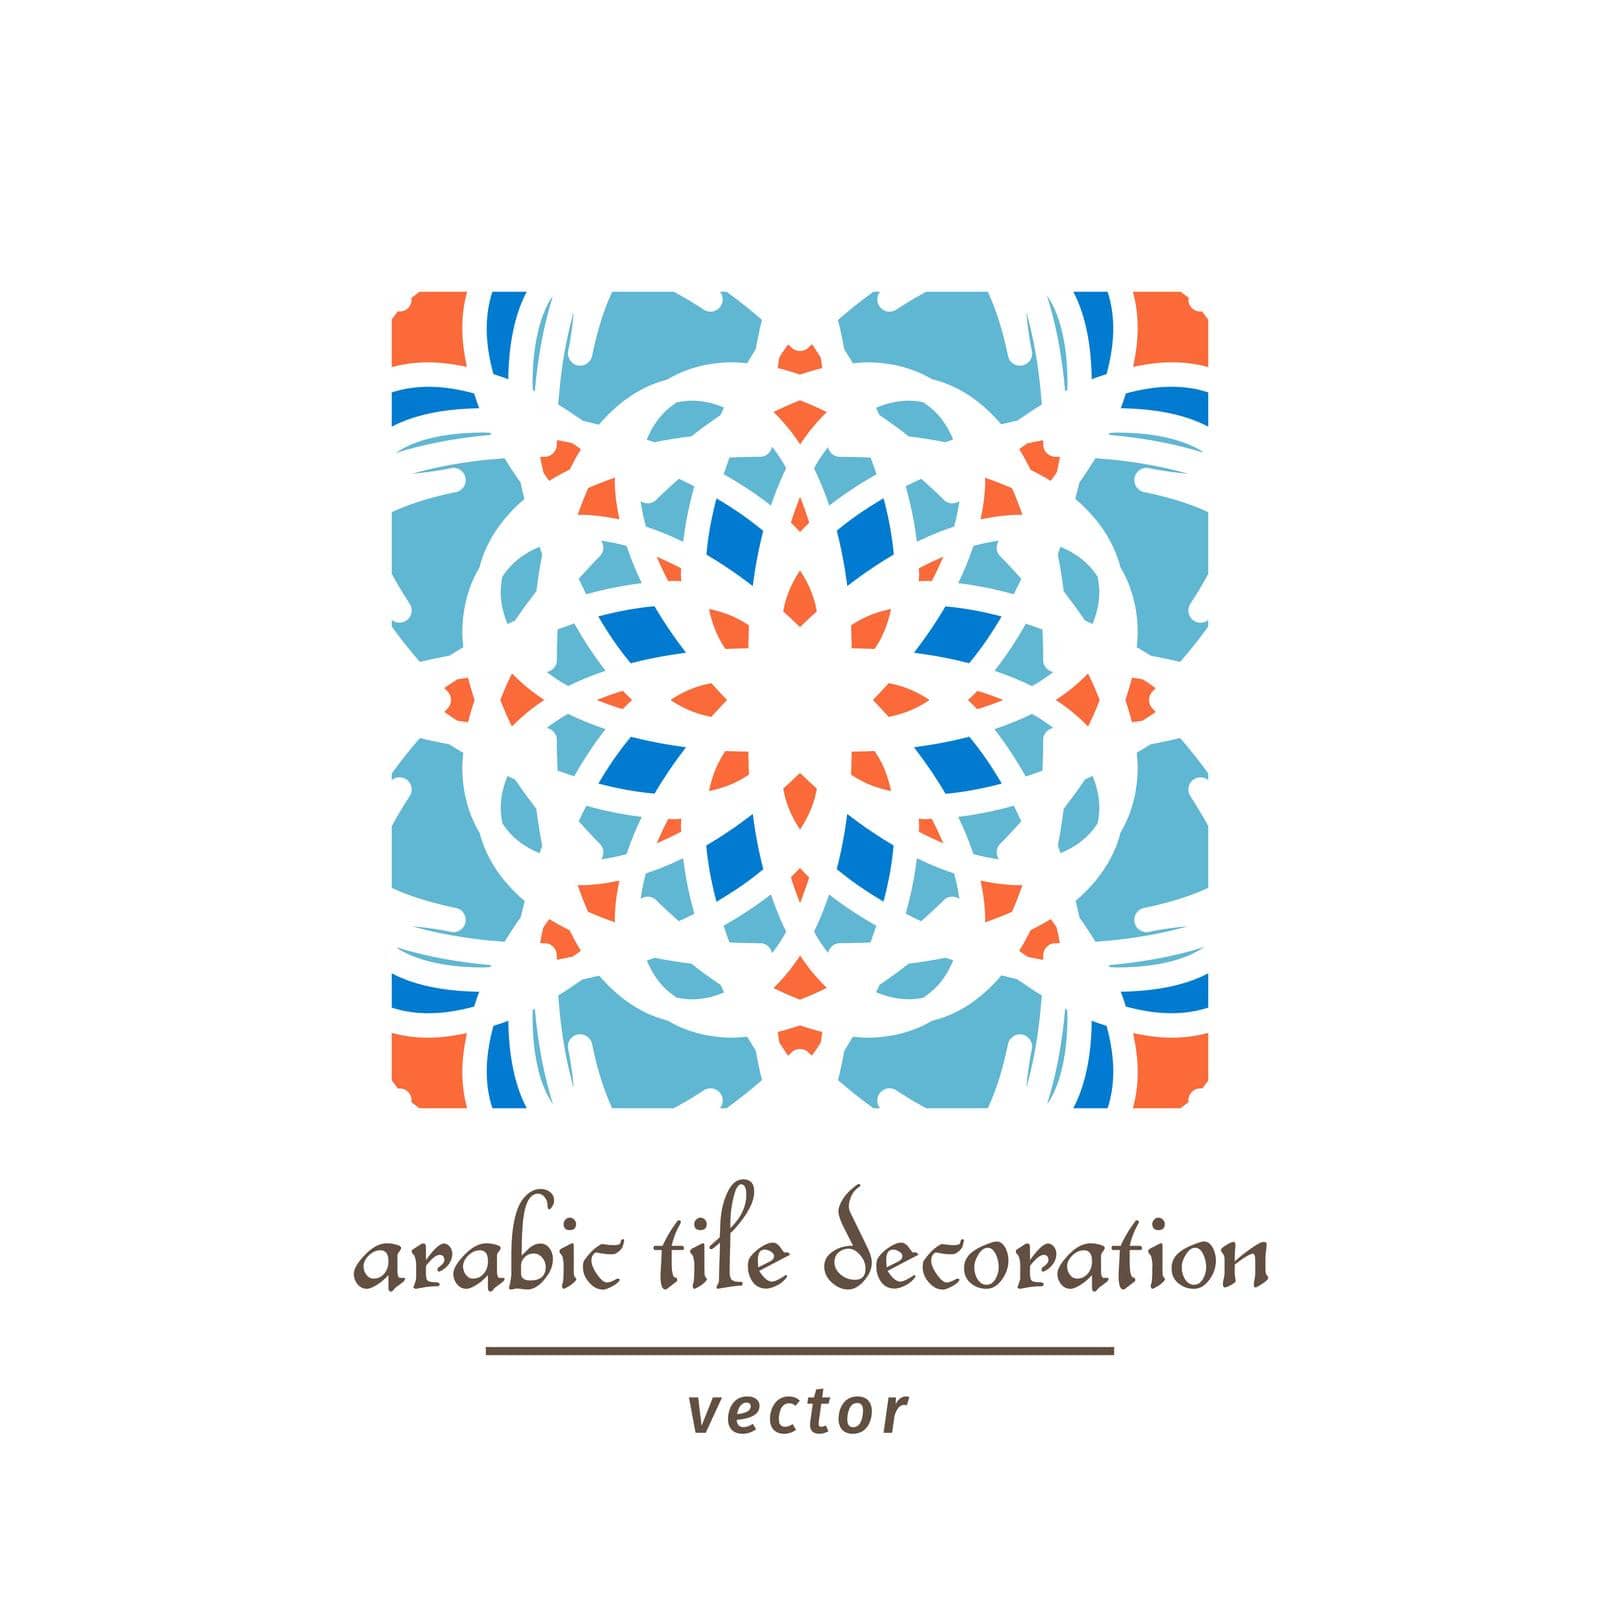 Decorative pattern swatch with arabic geometric ornament. Vector mosaic tile design